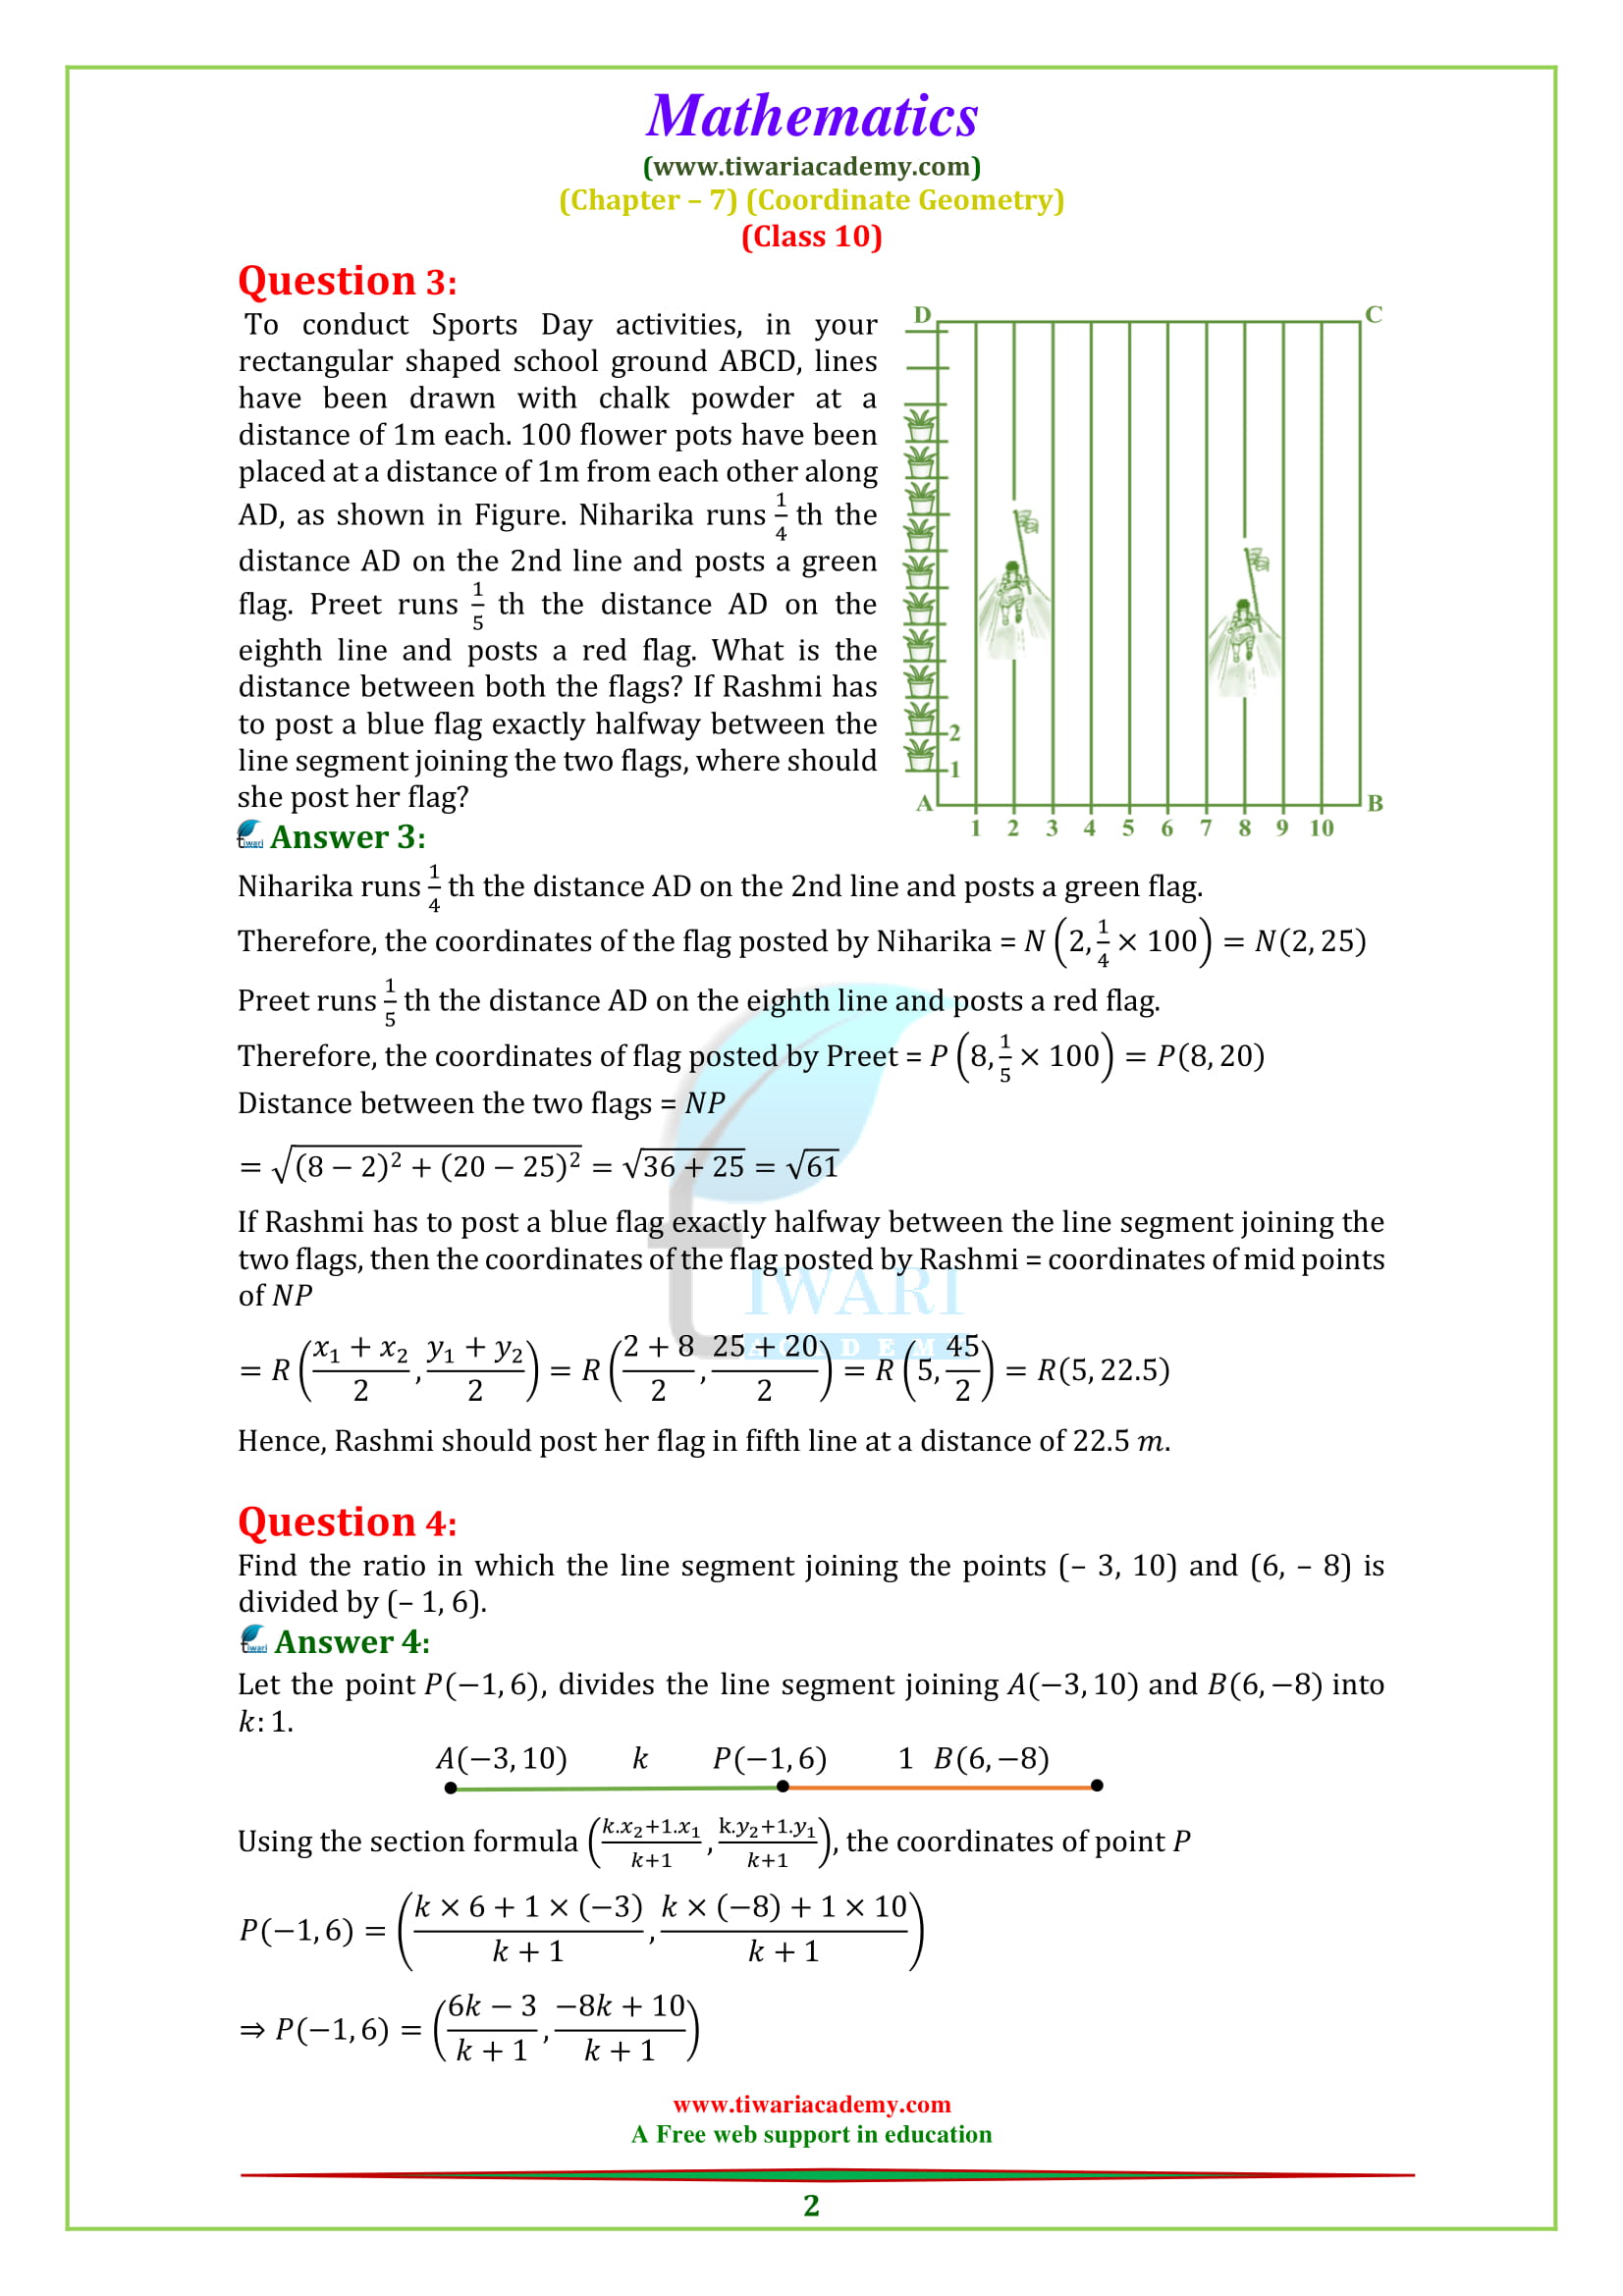 NCERT Solutions for Class 10 Maths Chapter 7 Exercise 7.2 Question 1, 2, 3, 4, 5, 6, 7, 8, 9, 10